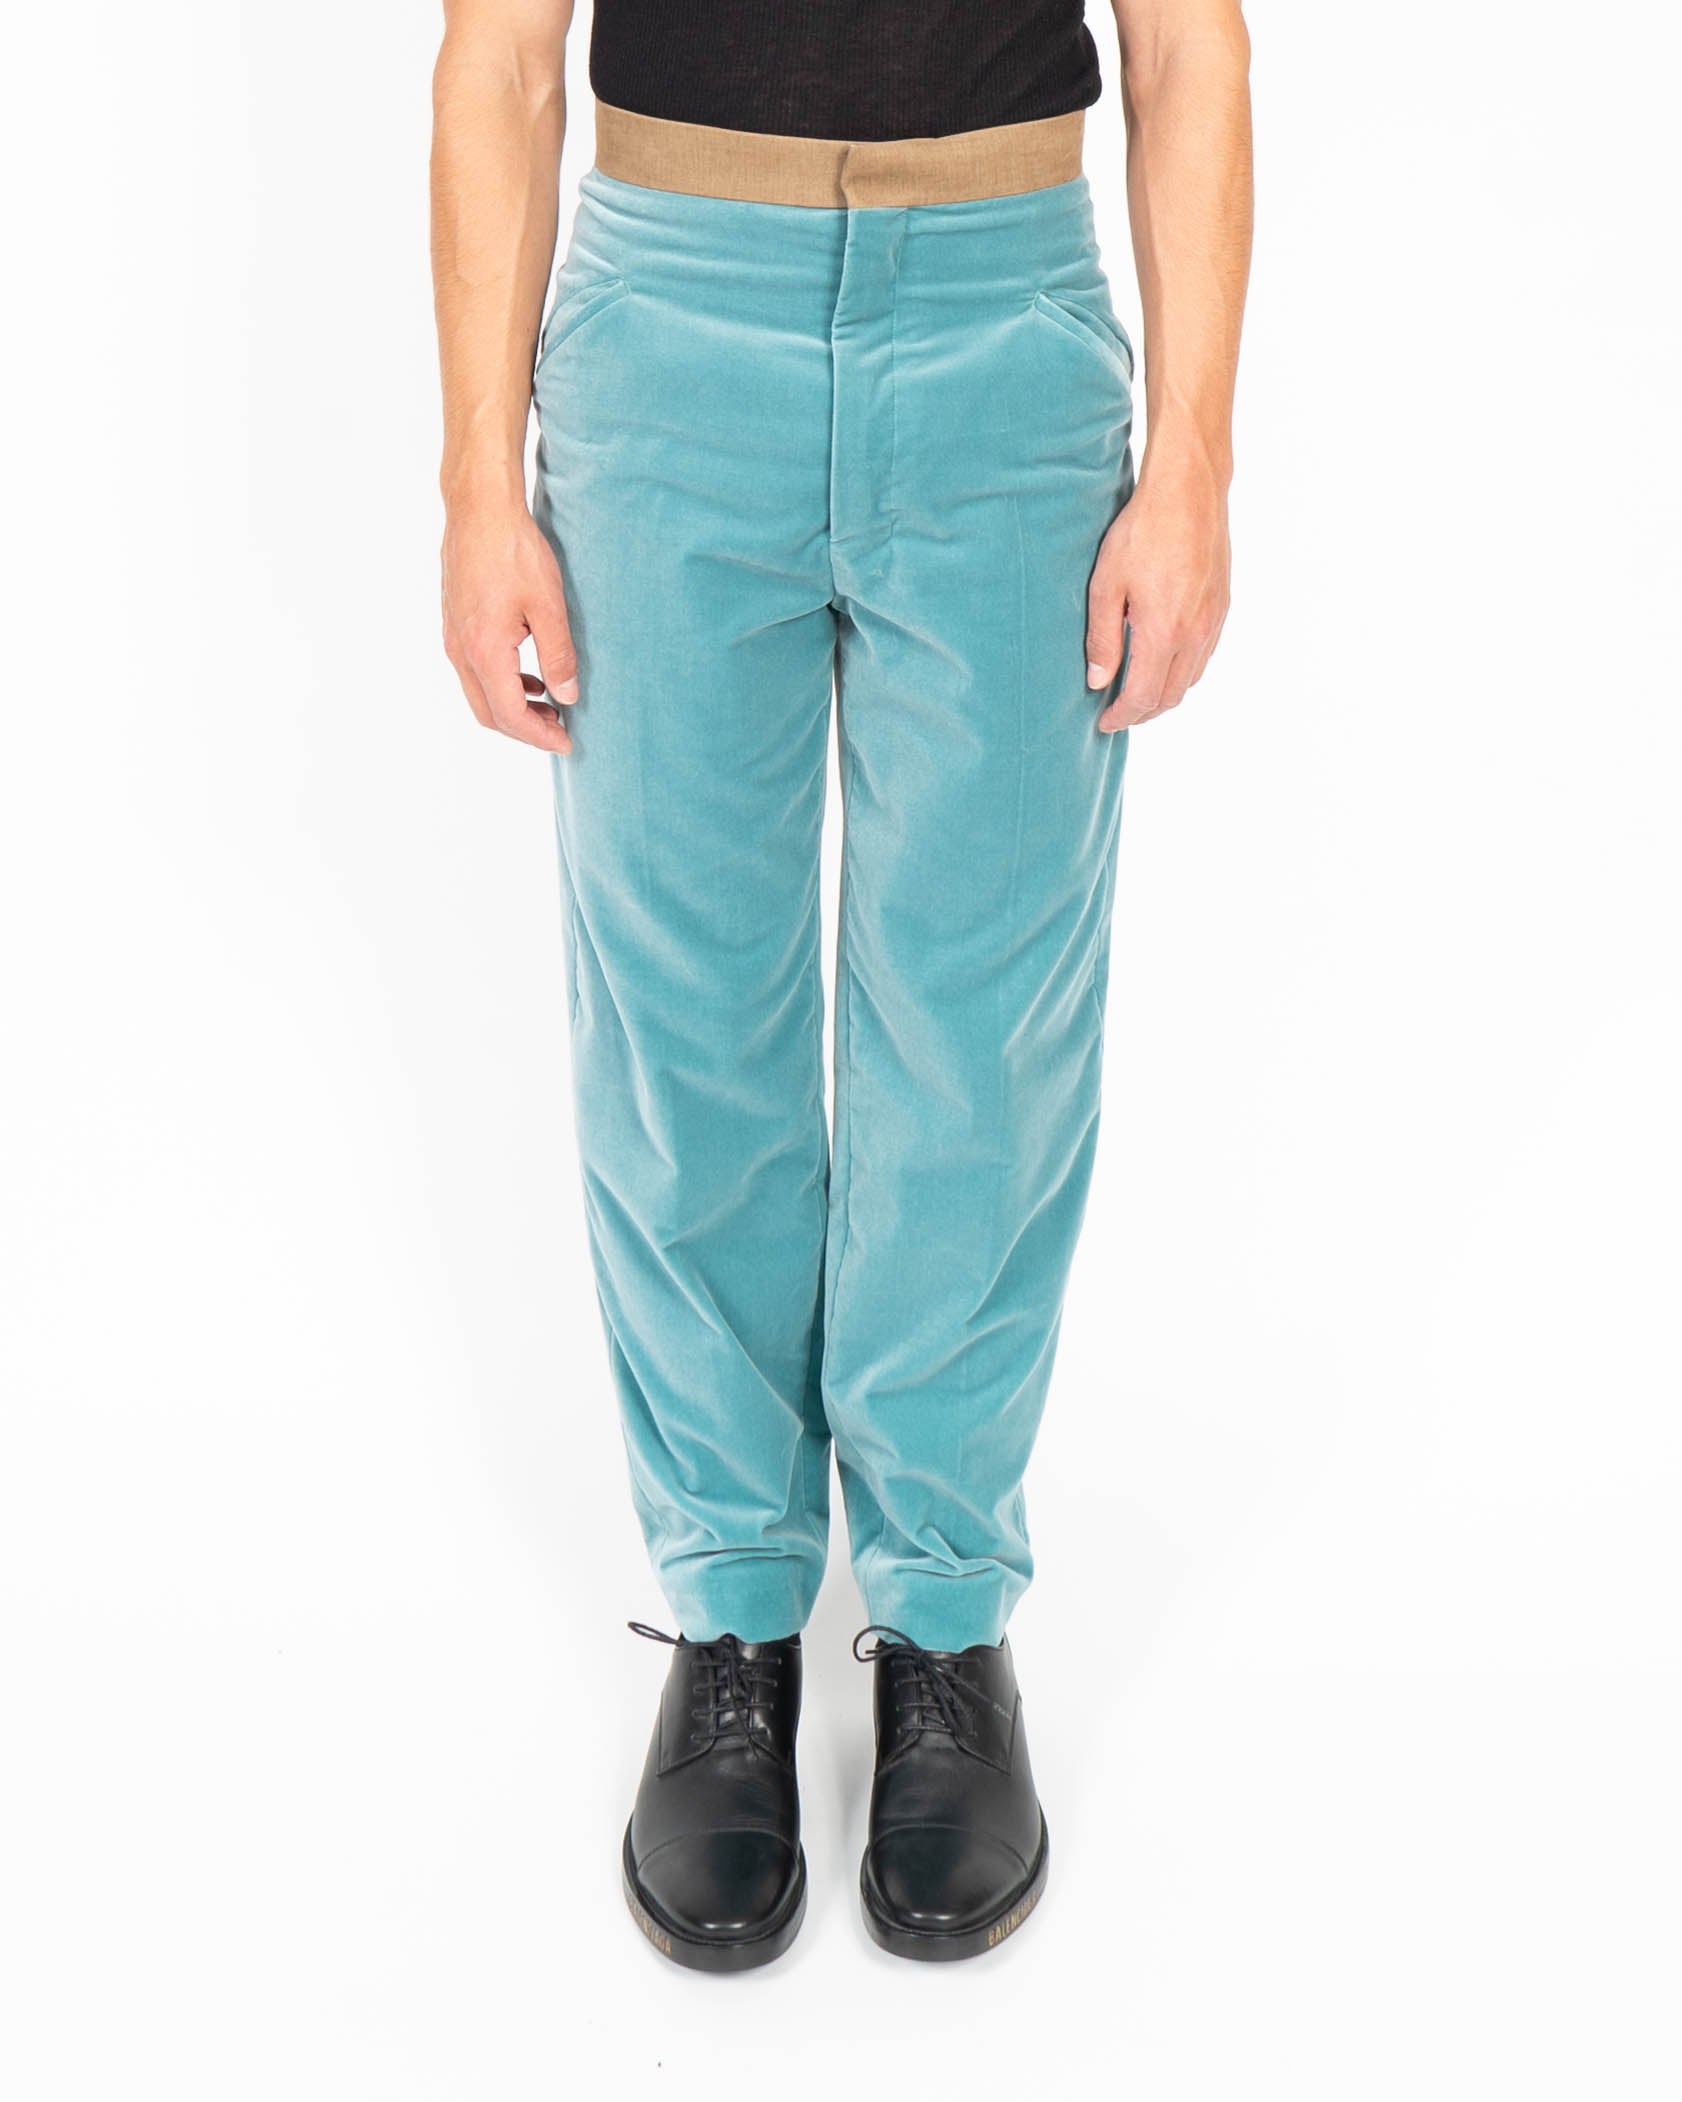 FW20 Contrasting Waistband Trousers in Turquoise Velvet